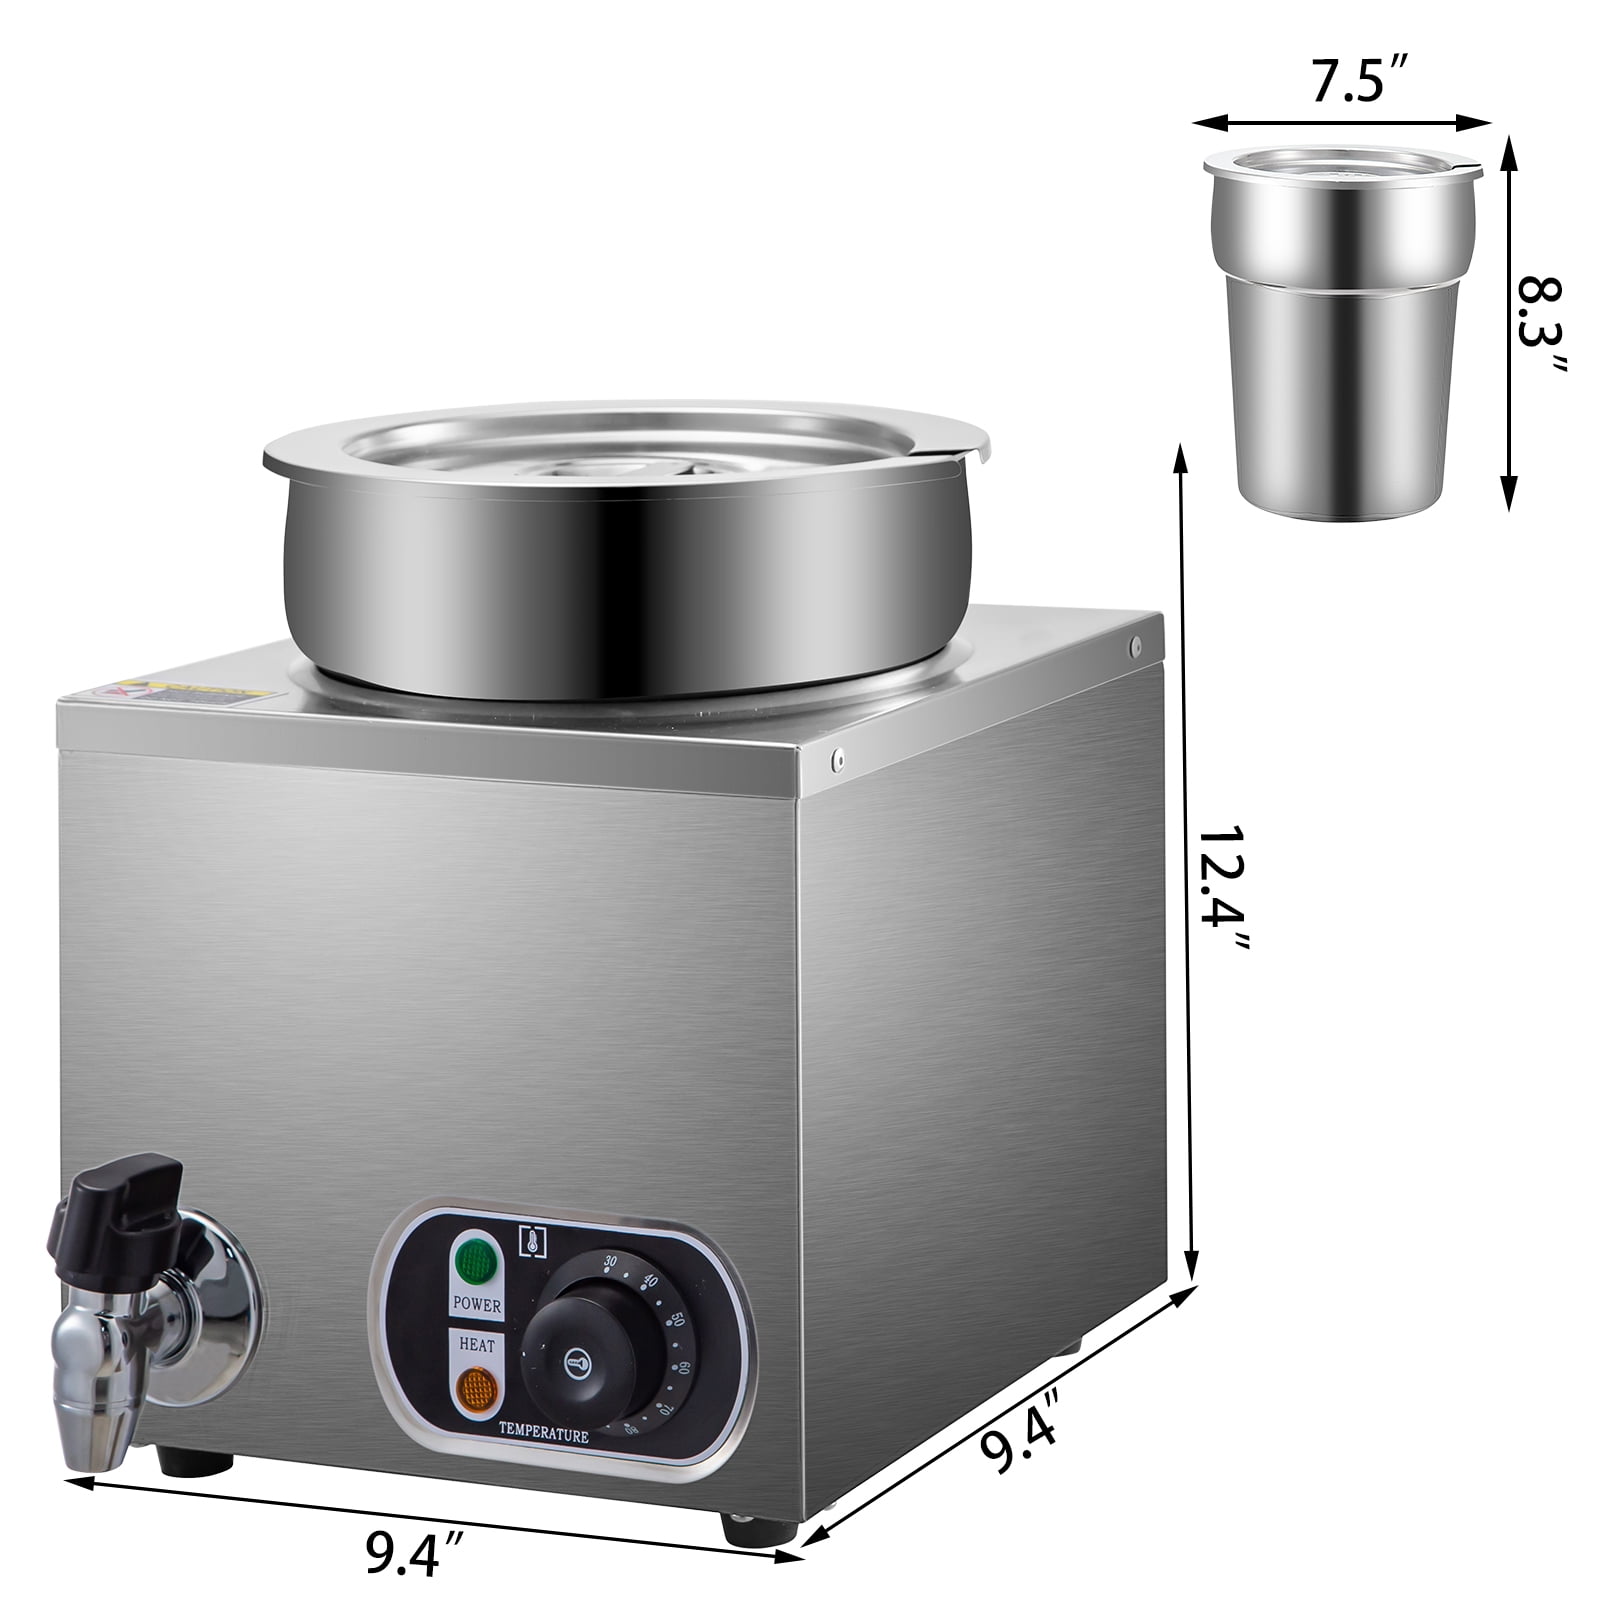 VEVOR Commercial Food Warmer 9.5 qt. Electric Soup Warmers Grade Stainless  Steel Bain Marie Buffet Equipment, 400W ZZBWTCG11110V2UH6V1 - The Home Depot